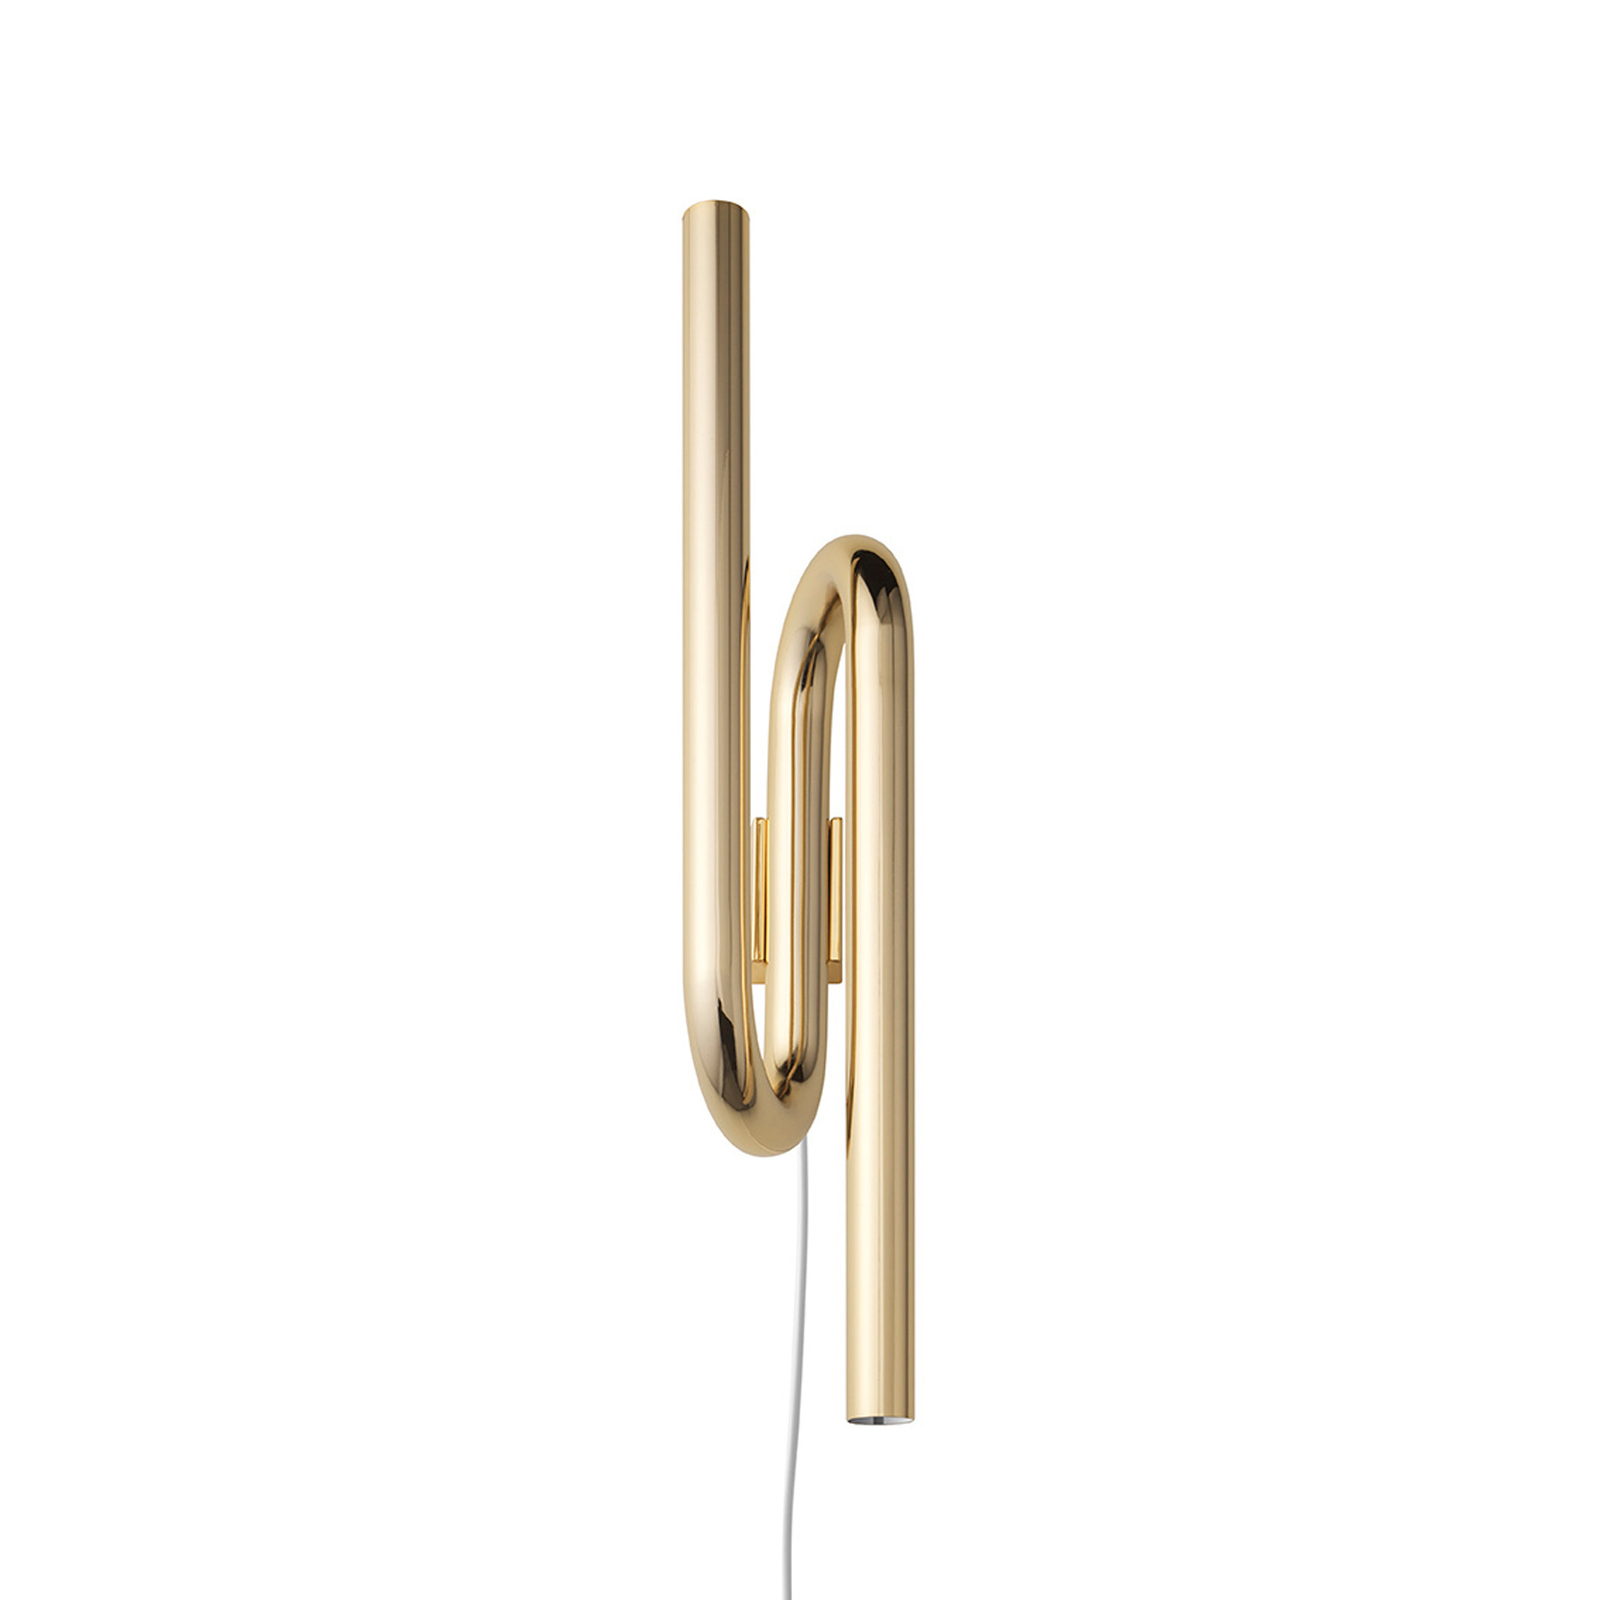 Foscarini Tobia LED wall light with cable gold